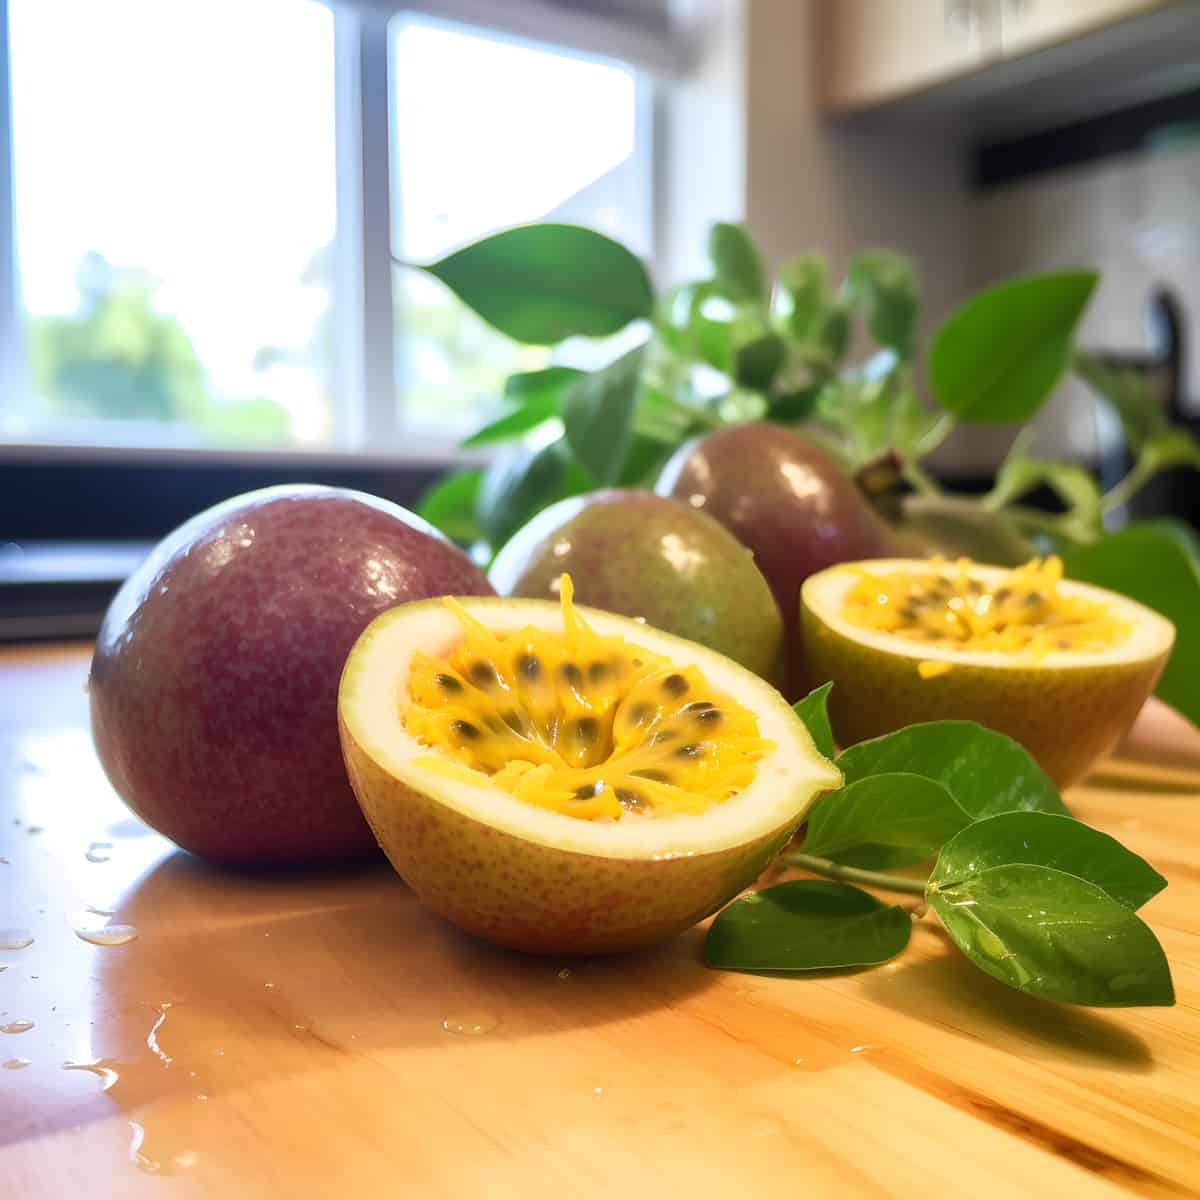 New Zealand Passionfruit on a kitchen counter